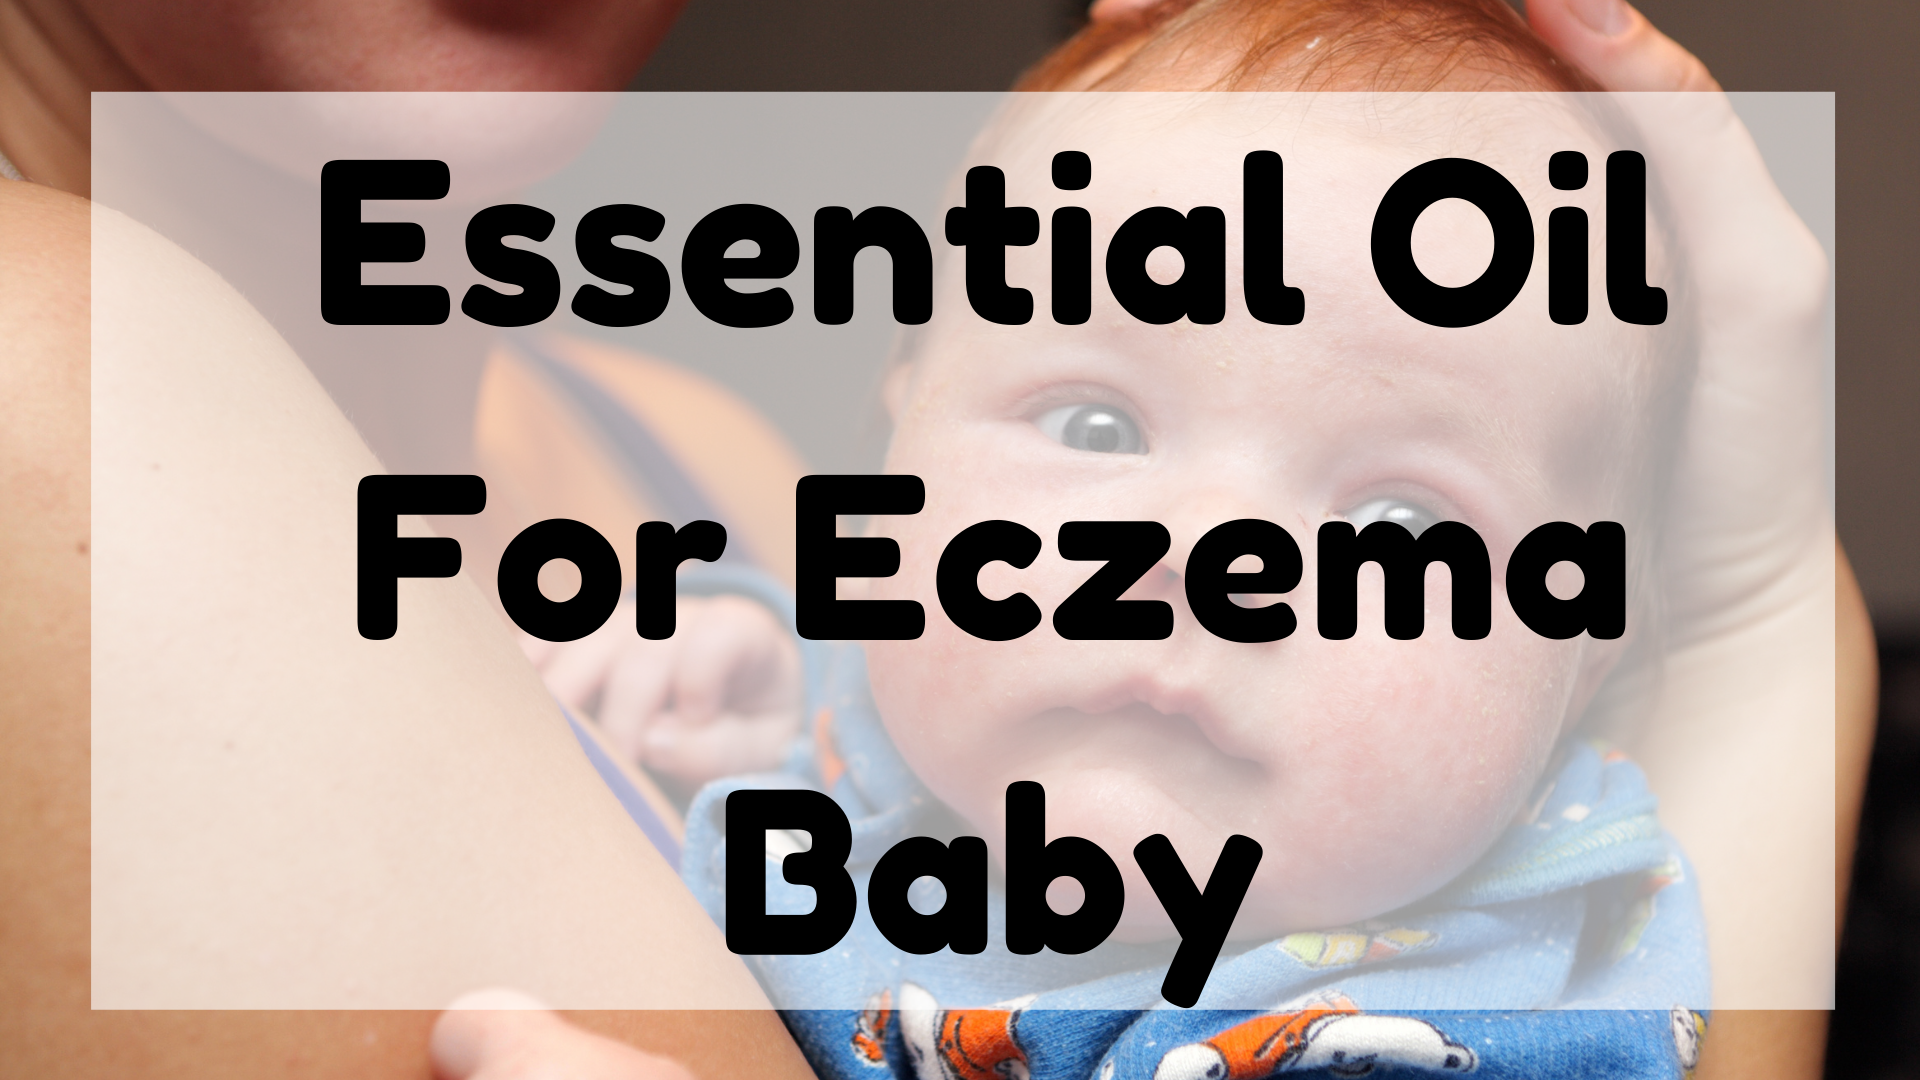 Essential Oil For Eczema Baby